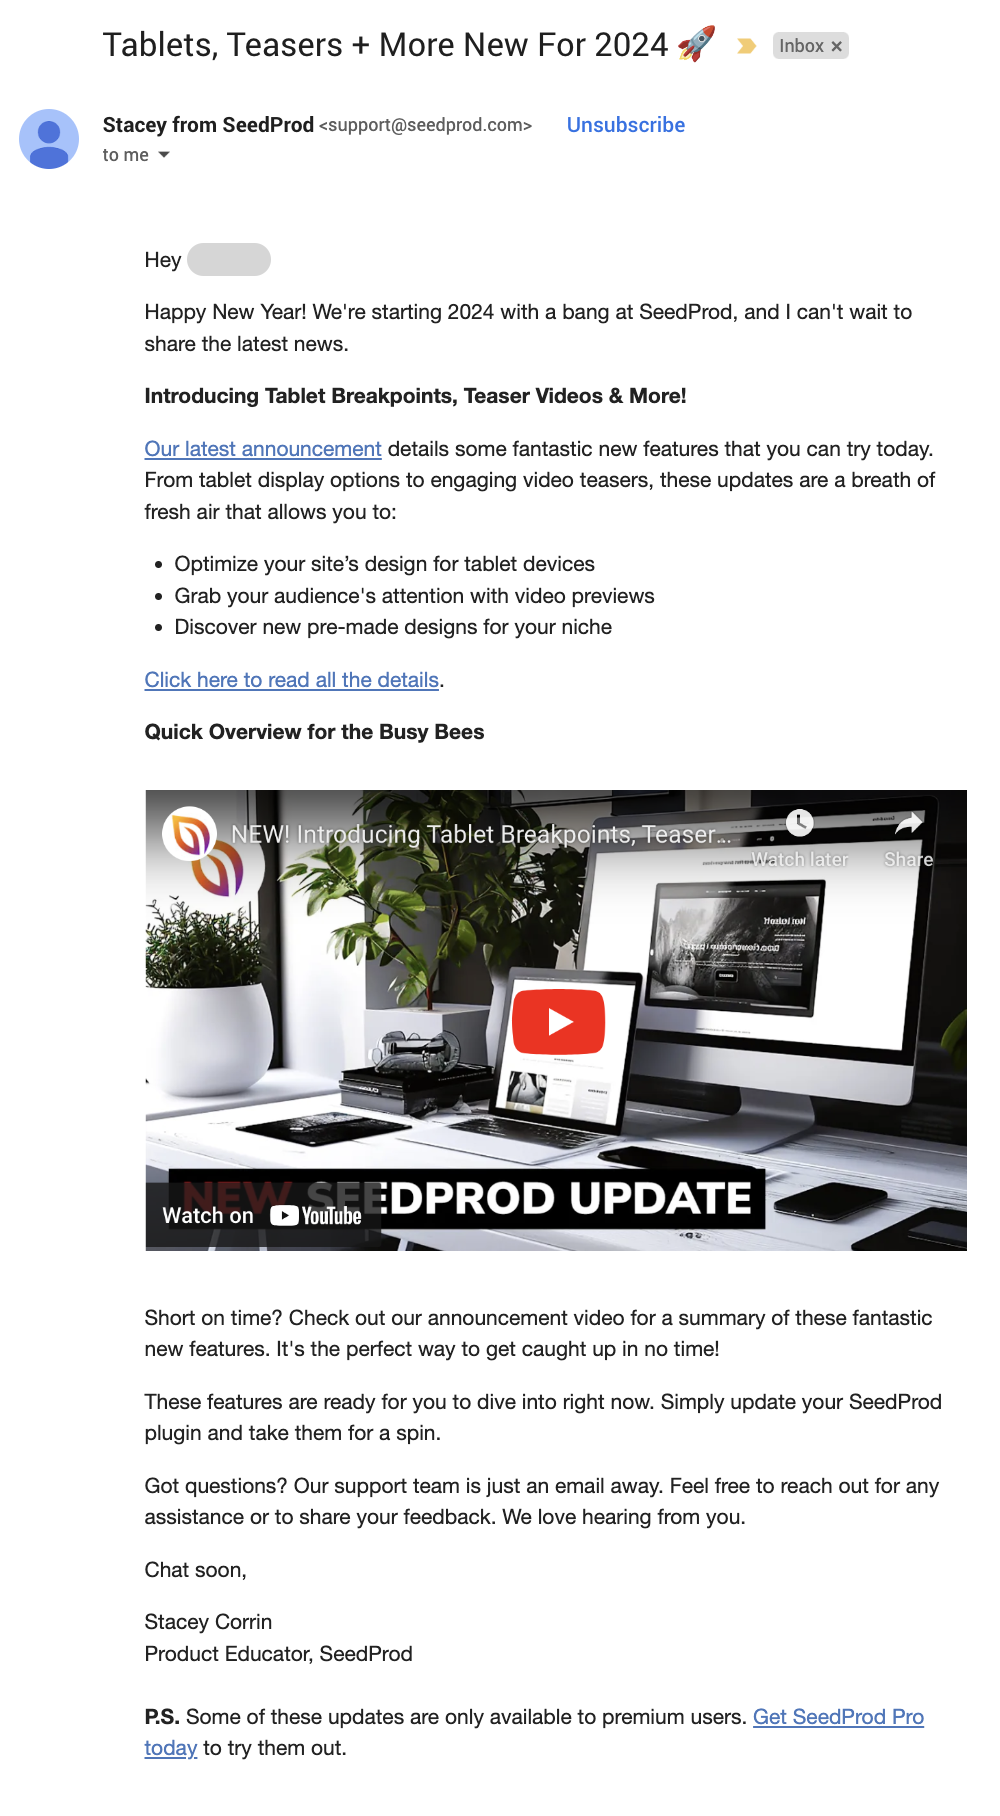 New Feature Announcement Emails: Screenshot of SeedProd's new feature roundup email